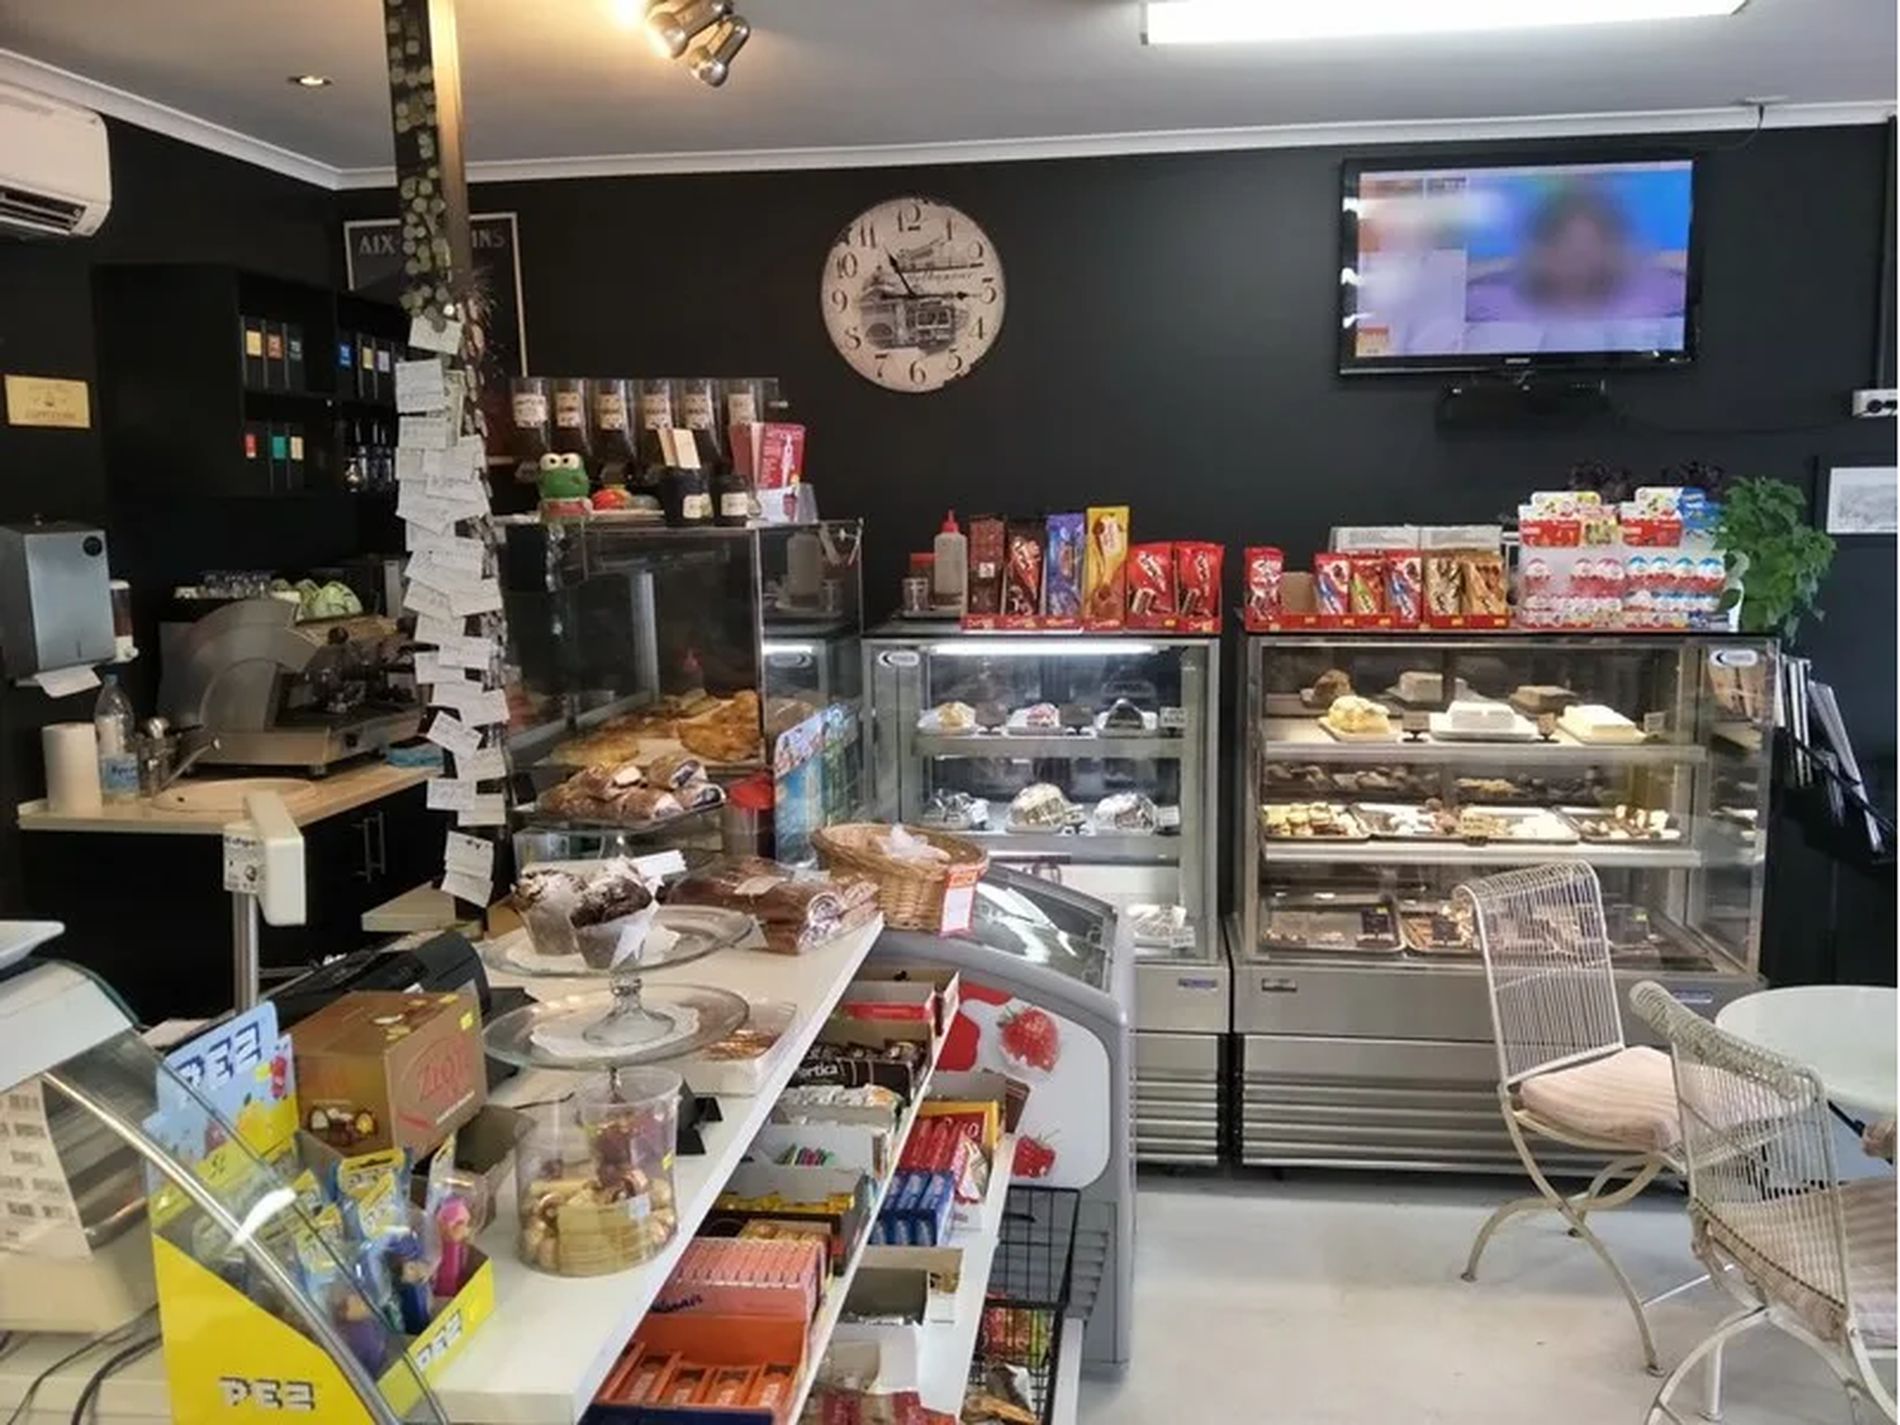 Deli and cafe for sale - UNDER CONTRACT